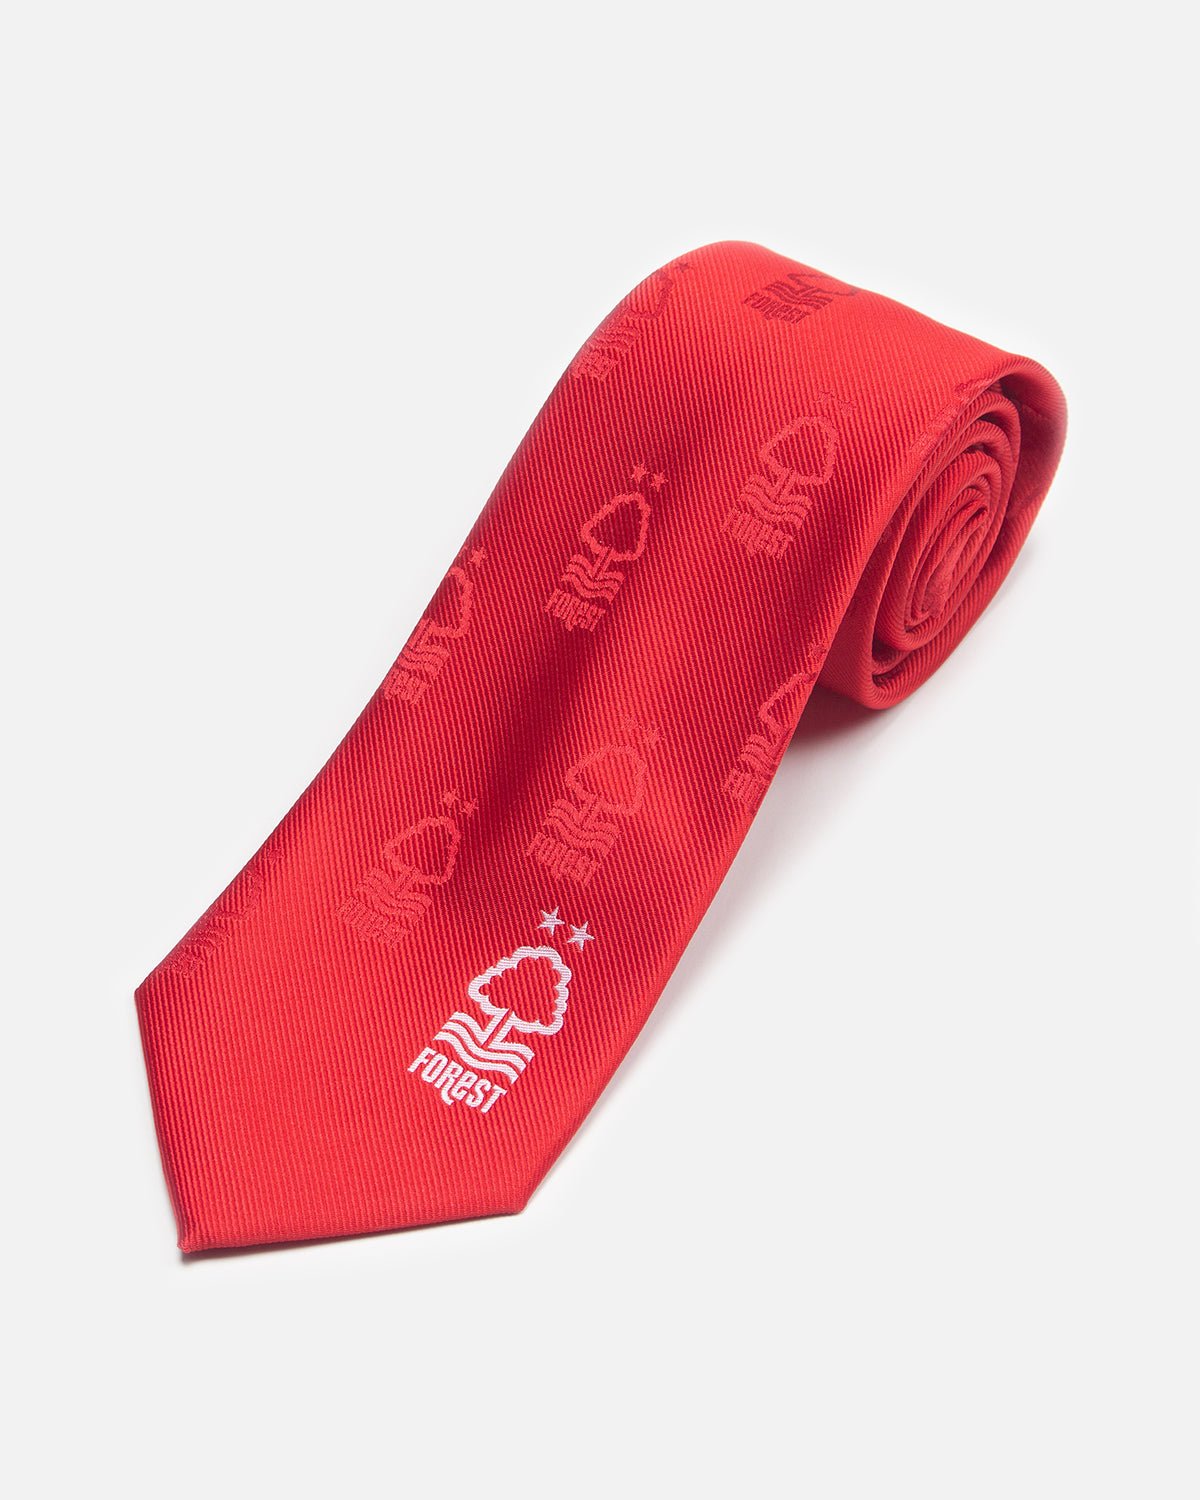 NFFC Red Multi Crest Tie - Nottingham Forest FC